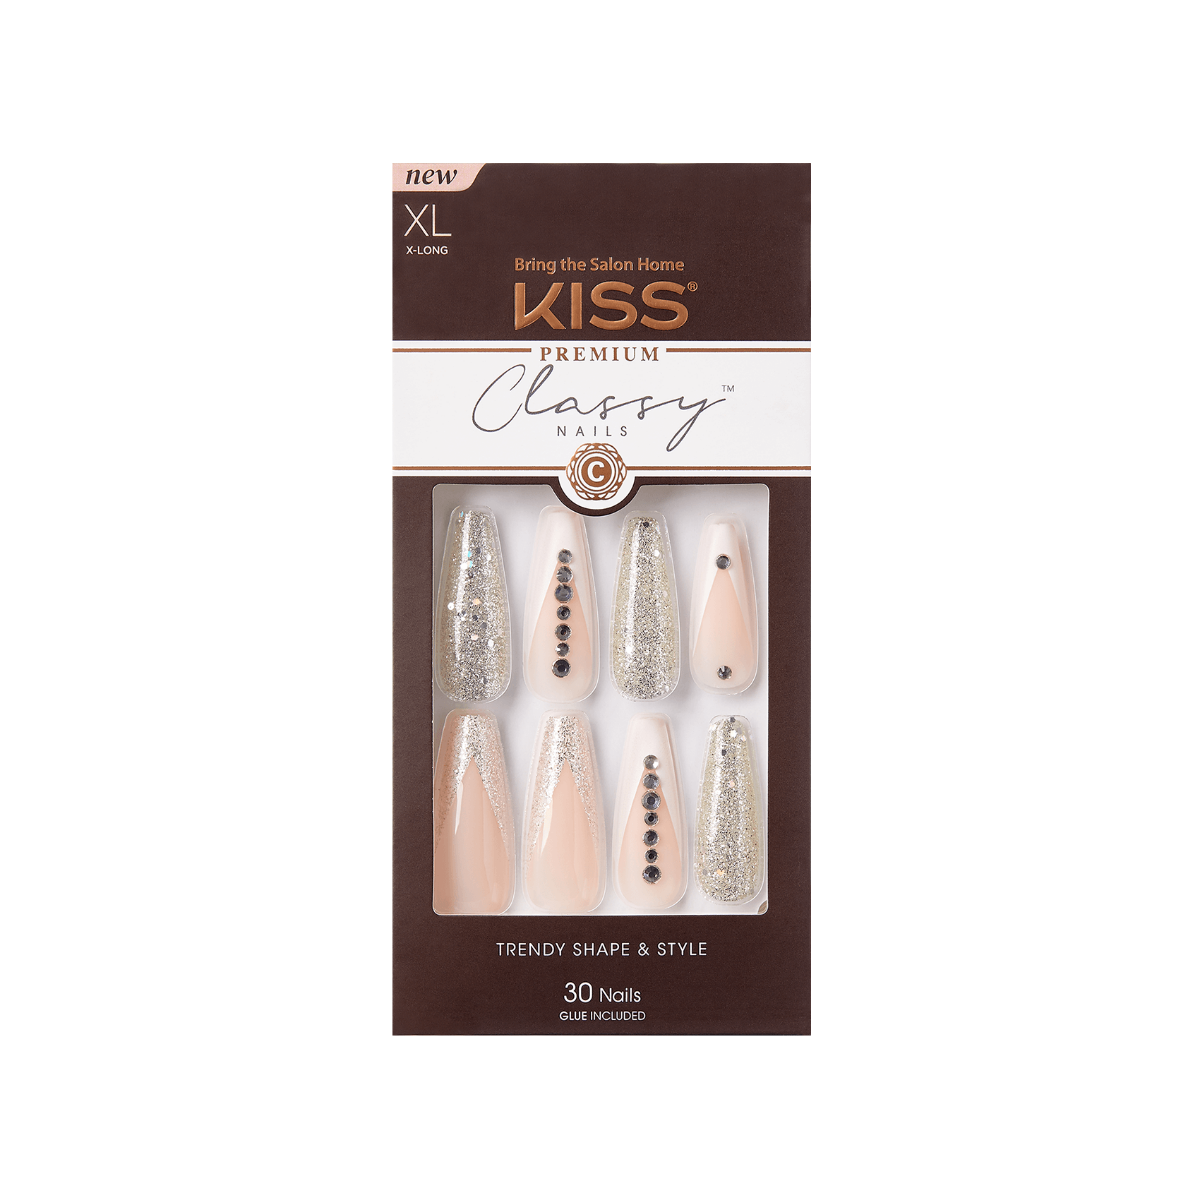 KISS Premium Classy Nails Sophisticated